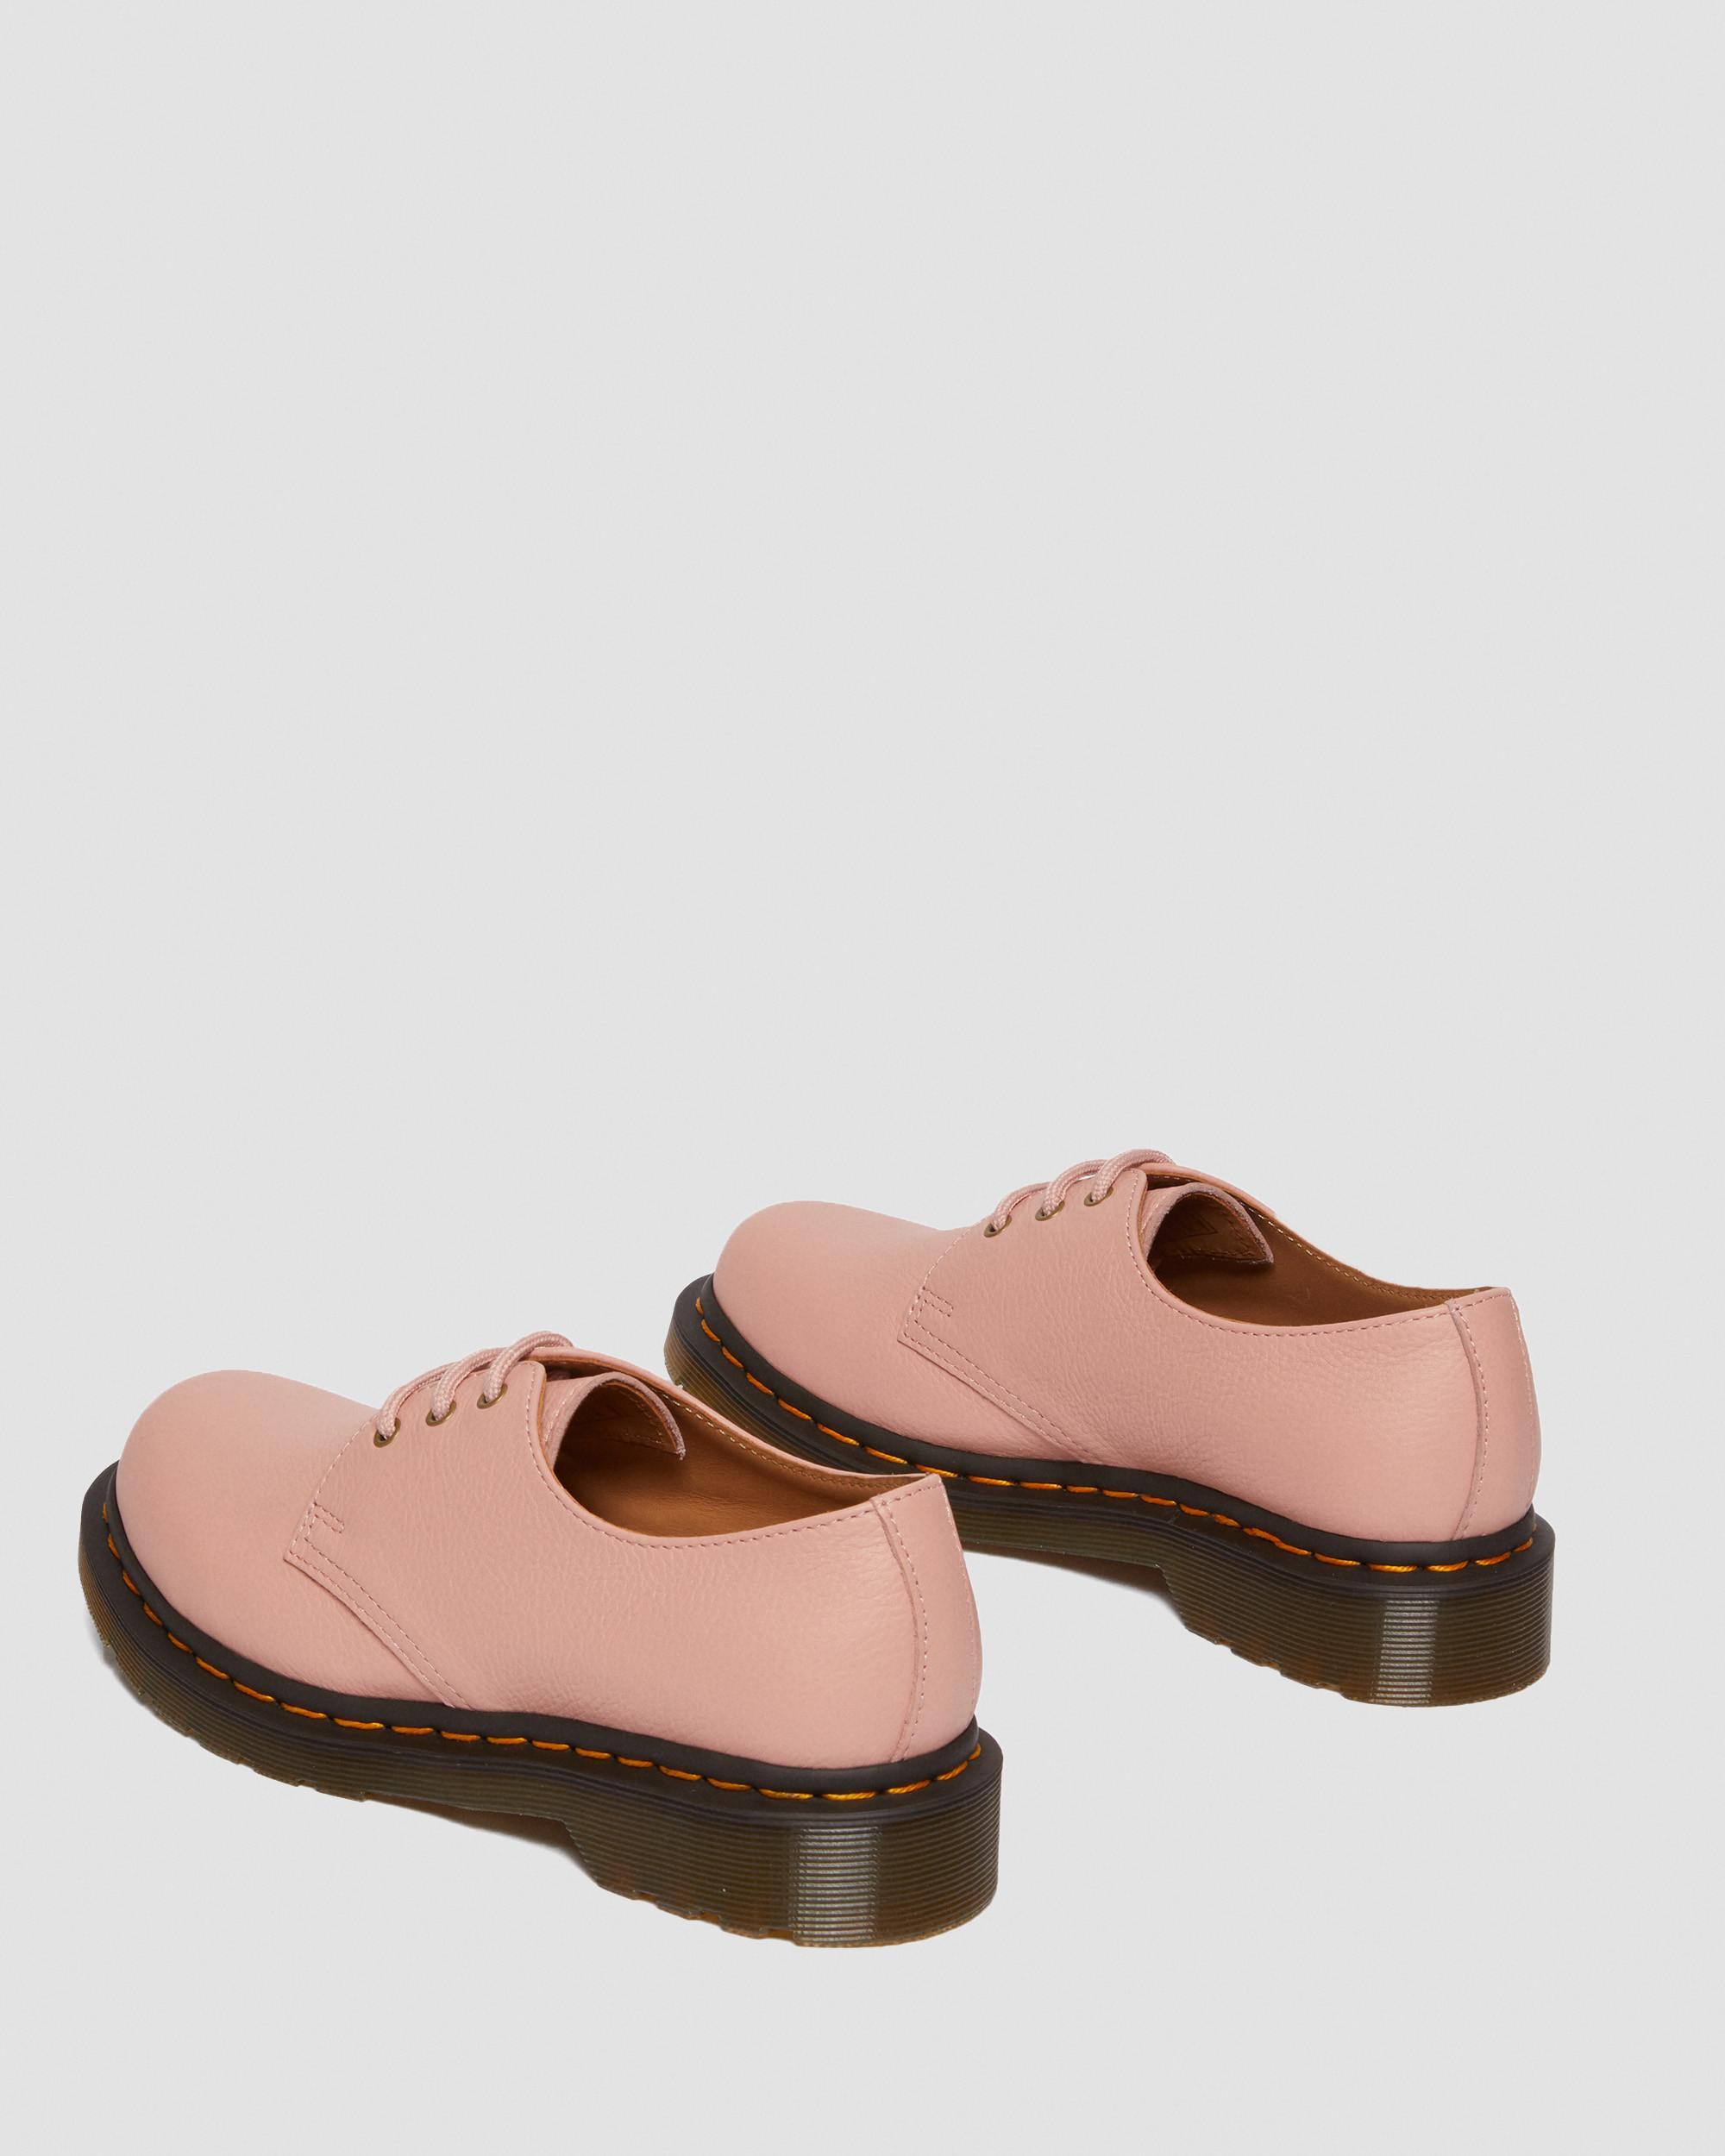 Dr. Martens 1461 Women's Virginia Leather Oxford Shoes in Pink | Lyst